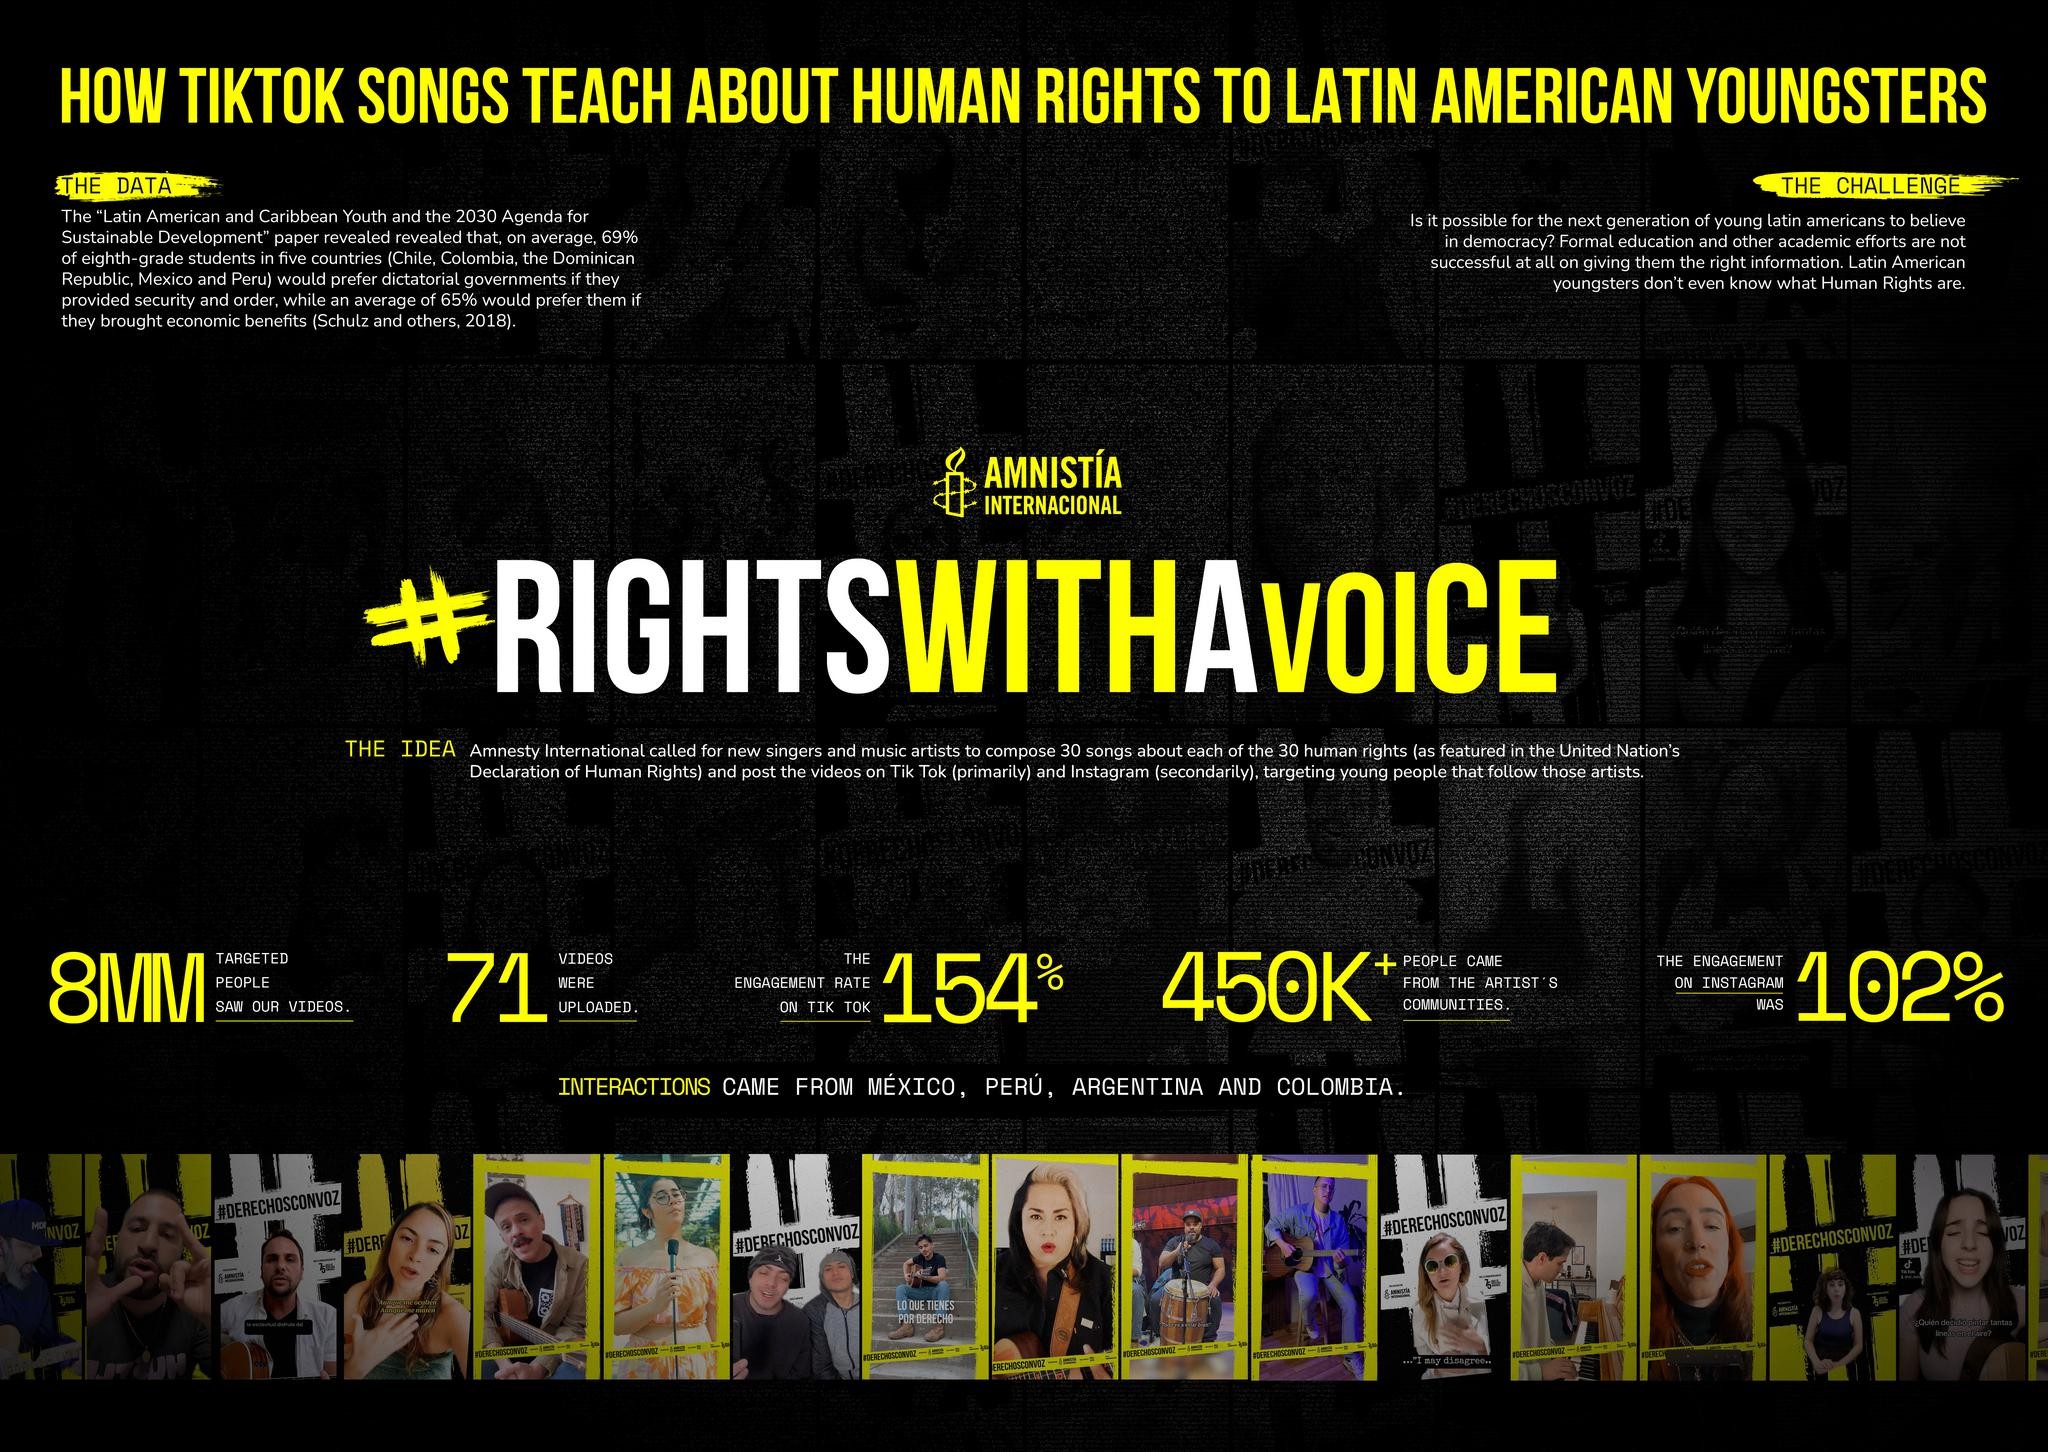 Rights With a Voice